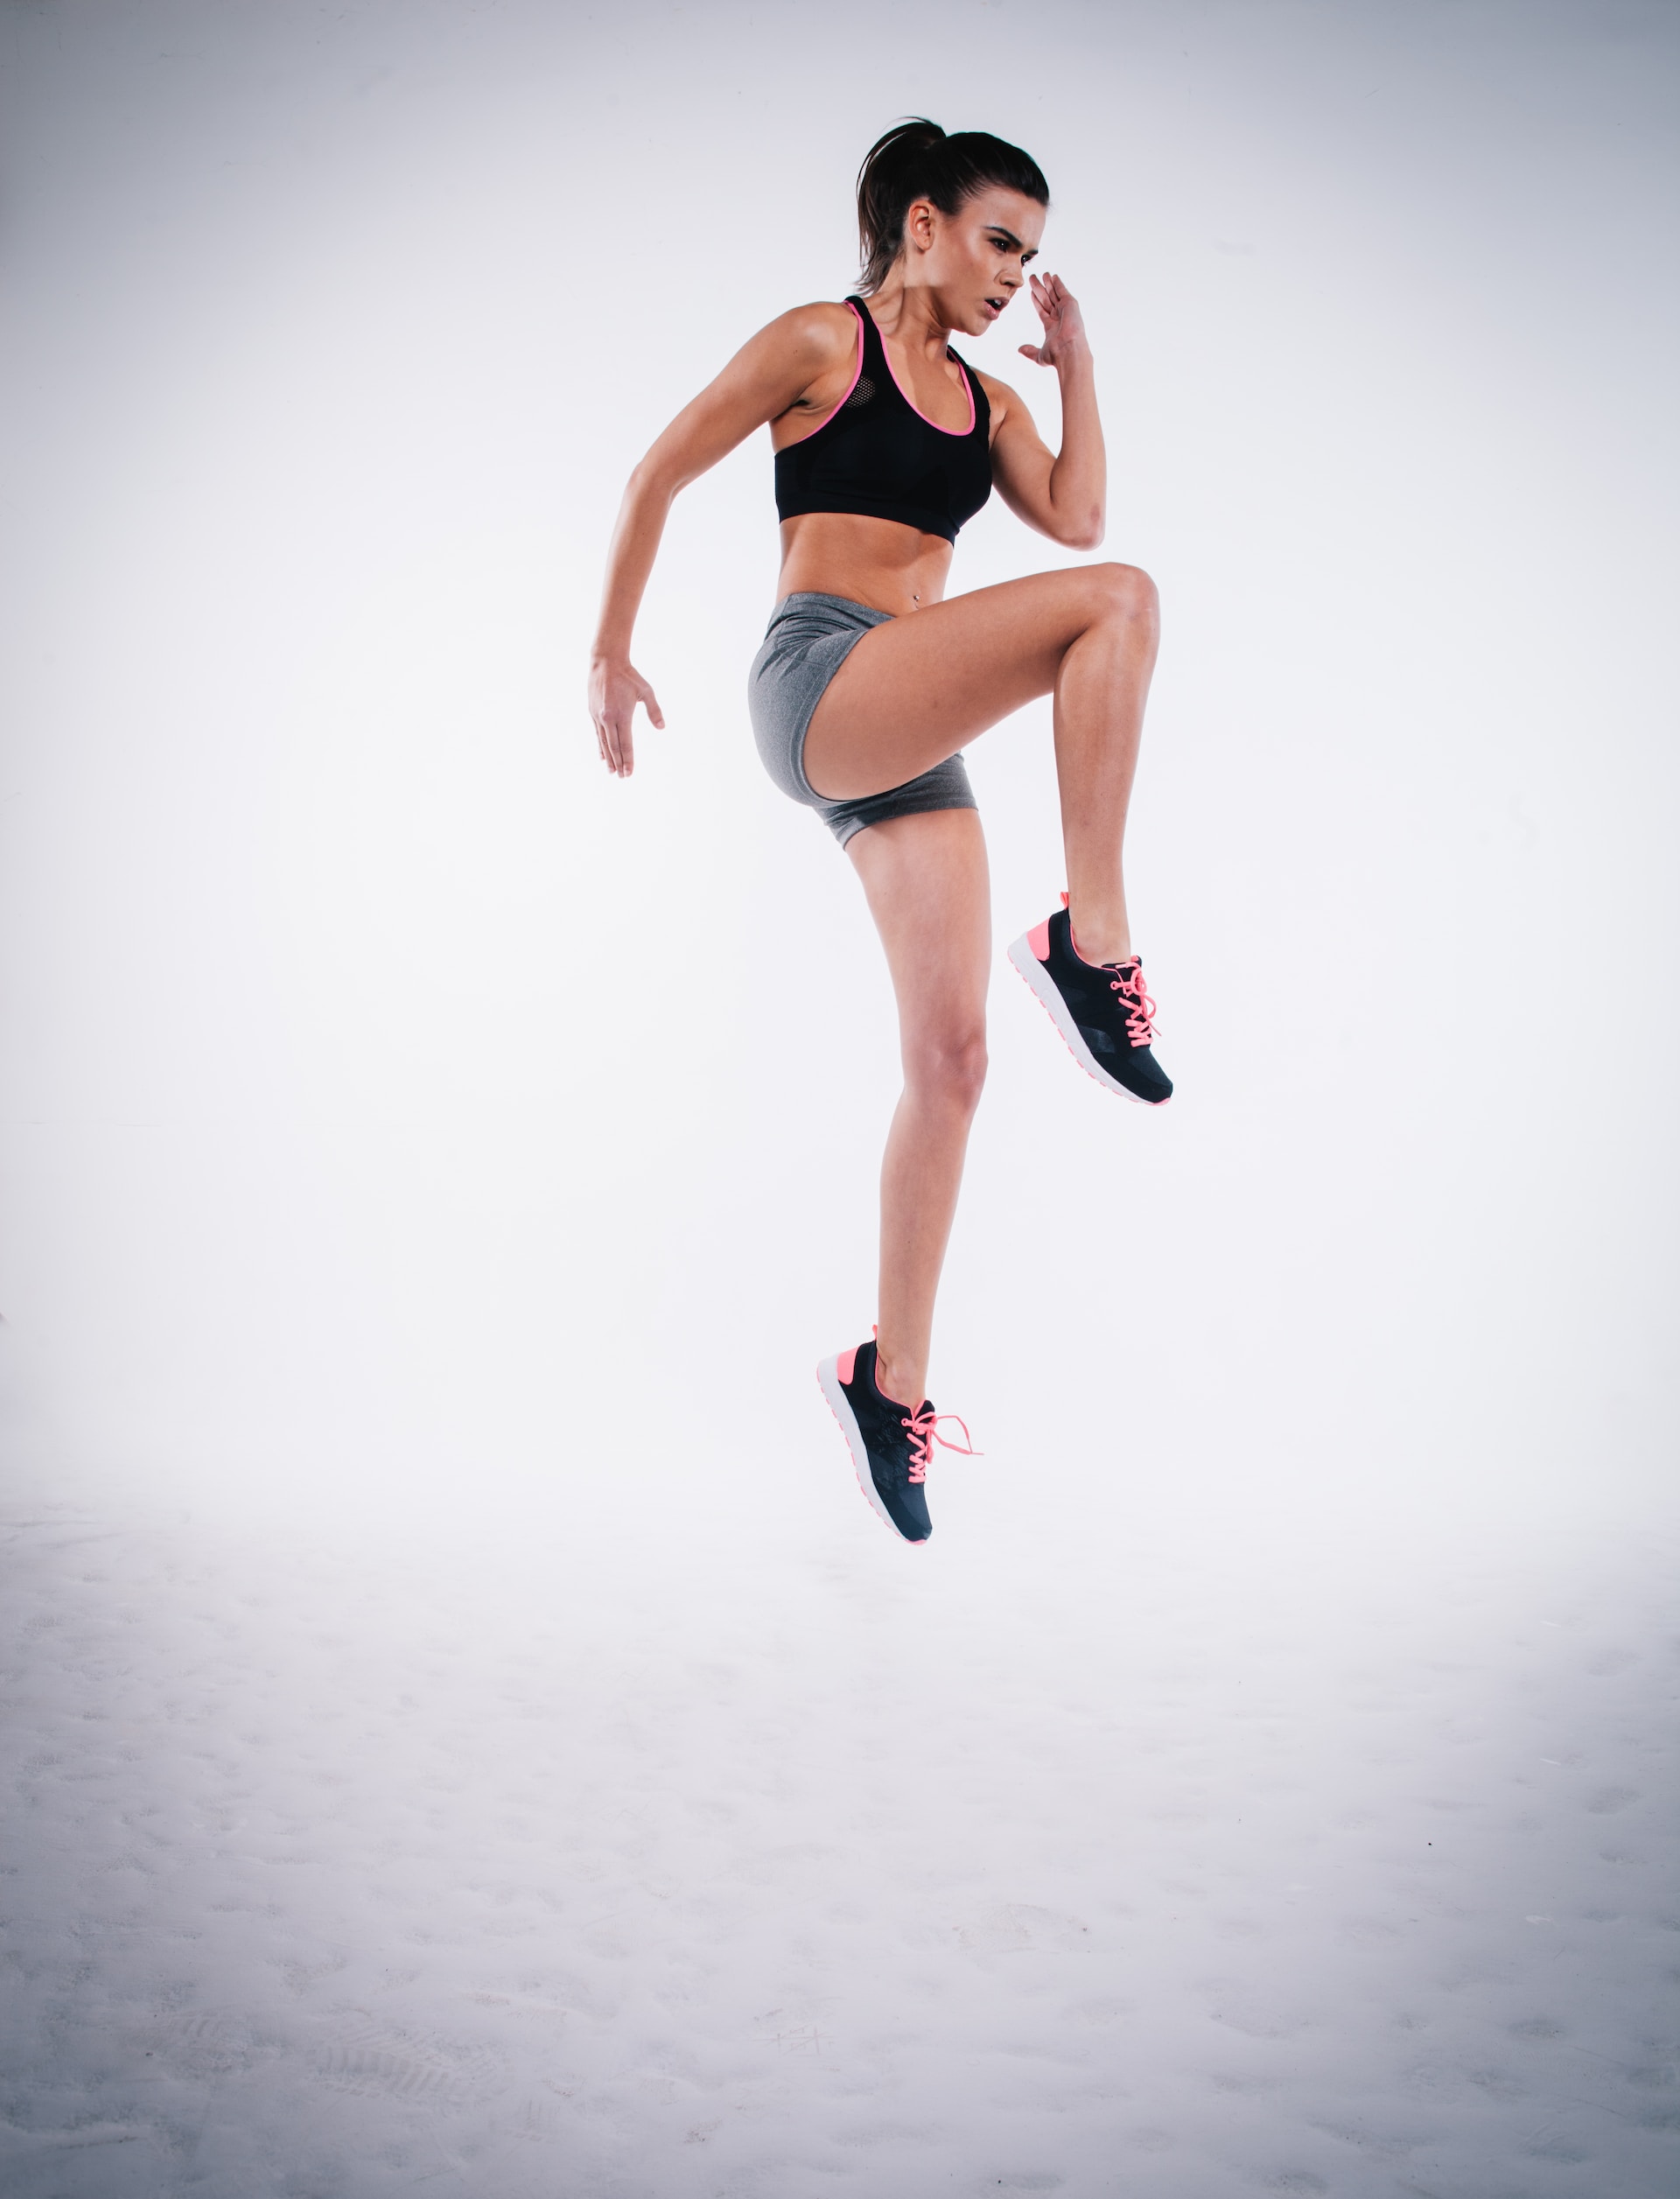 the image shows a female athlete in a jump